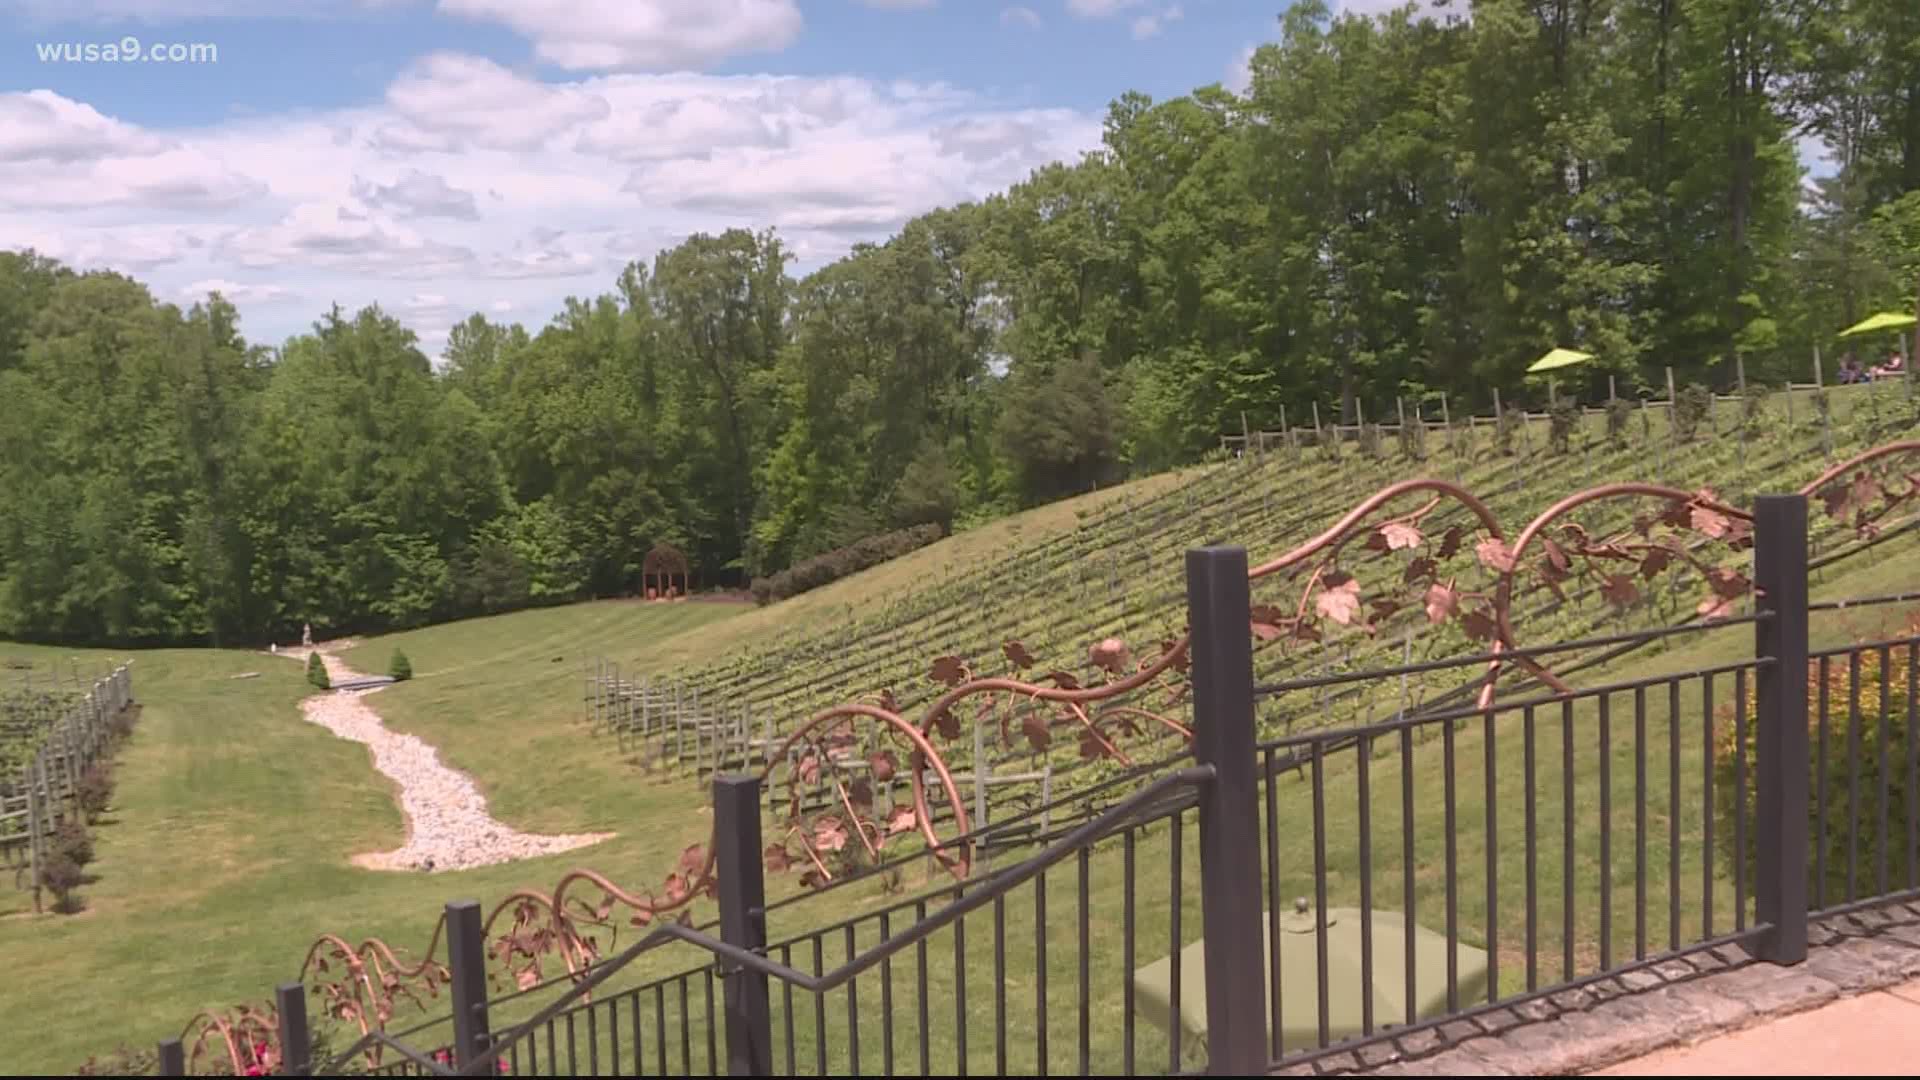 Hundreds flocked to the Potomac Point Winery in Stafford Saturday for reopening.